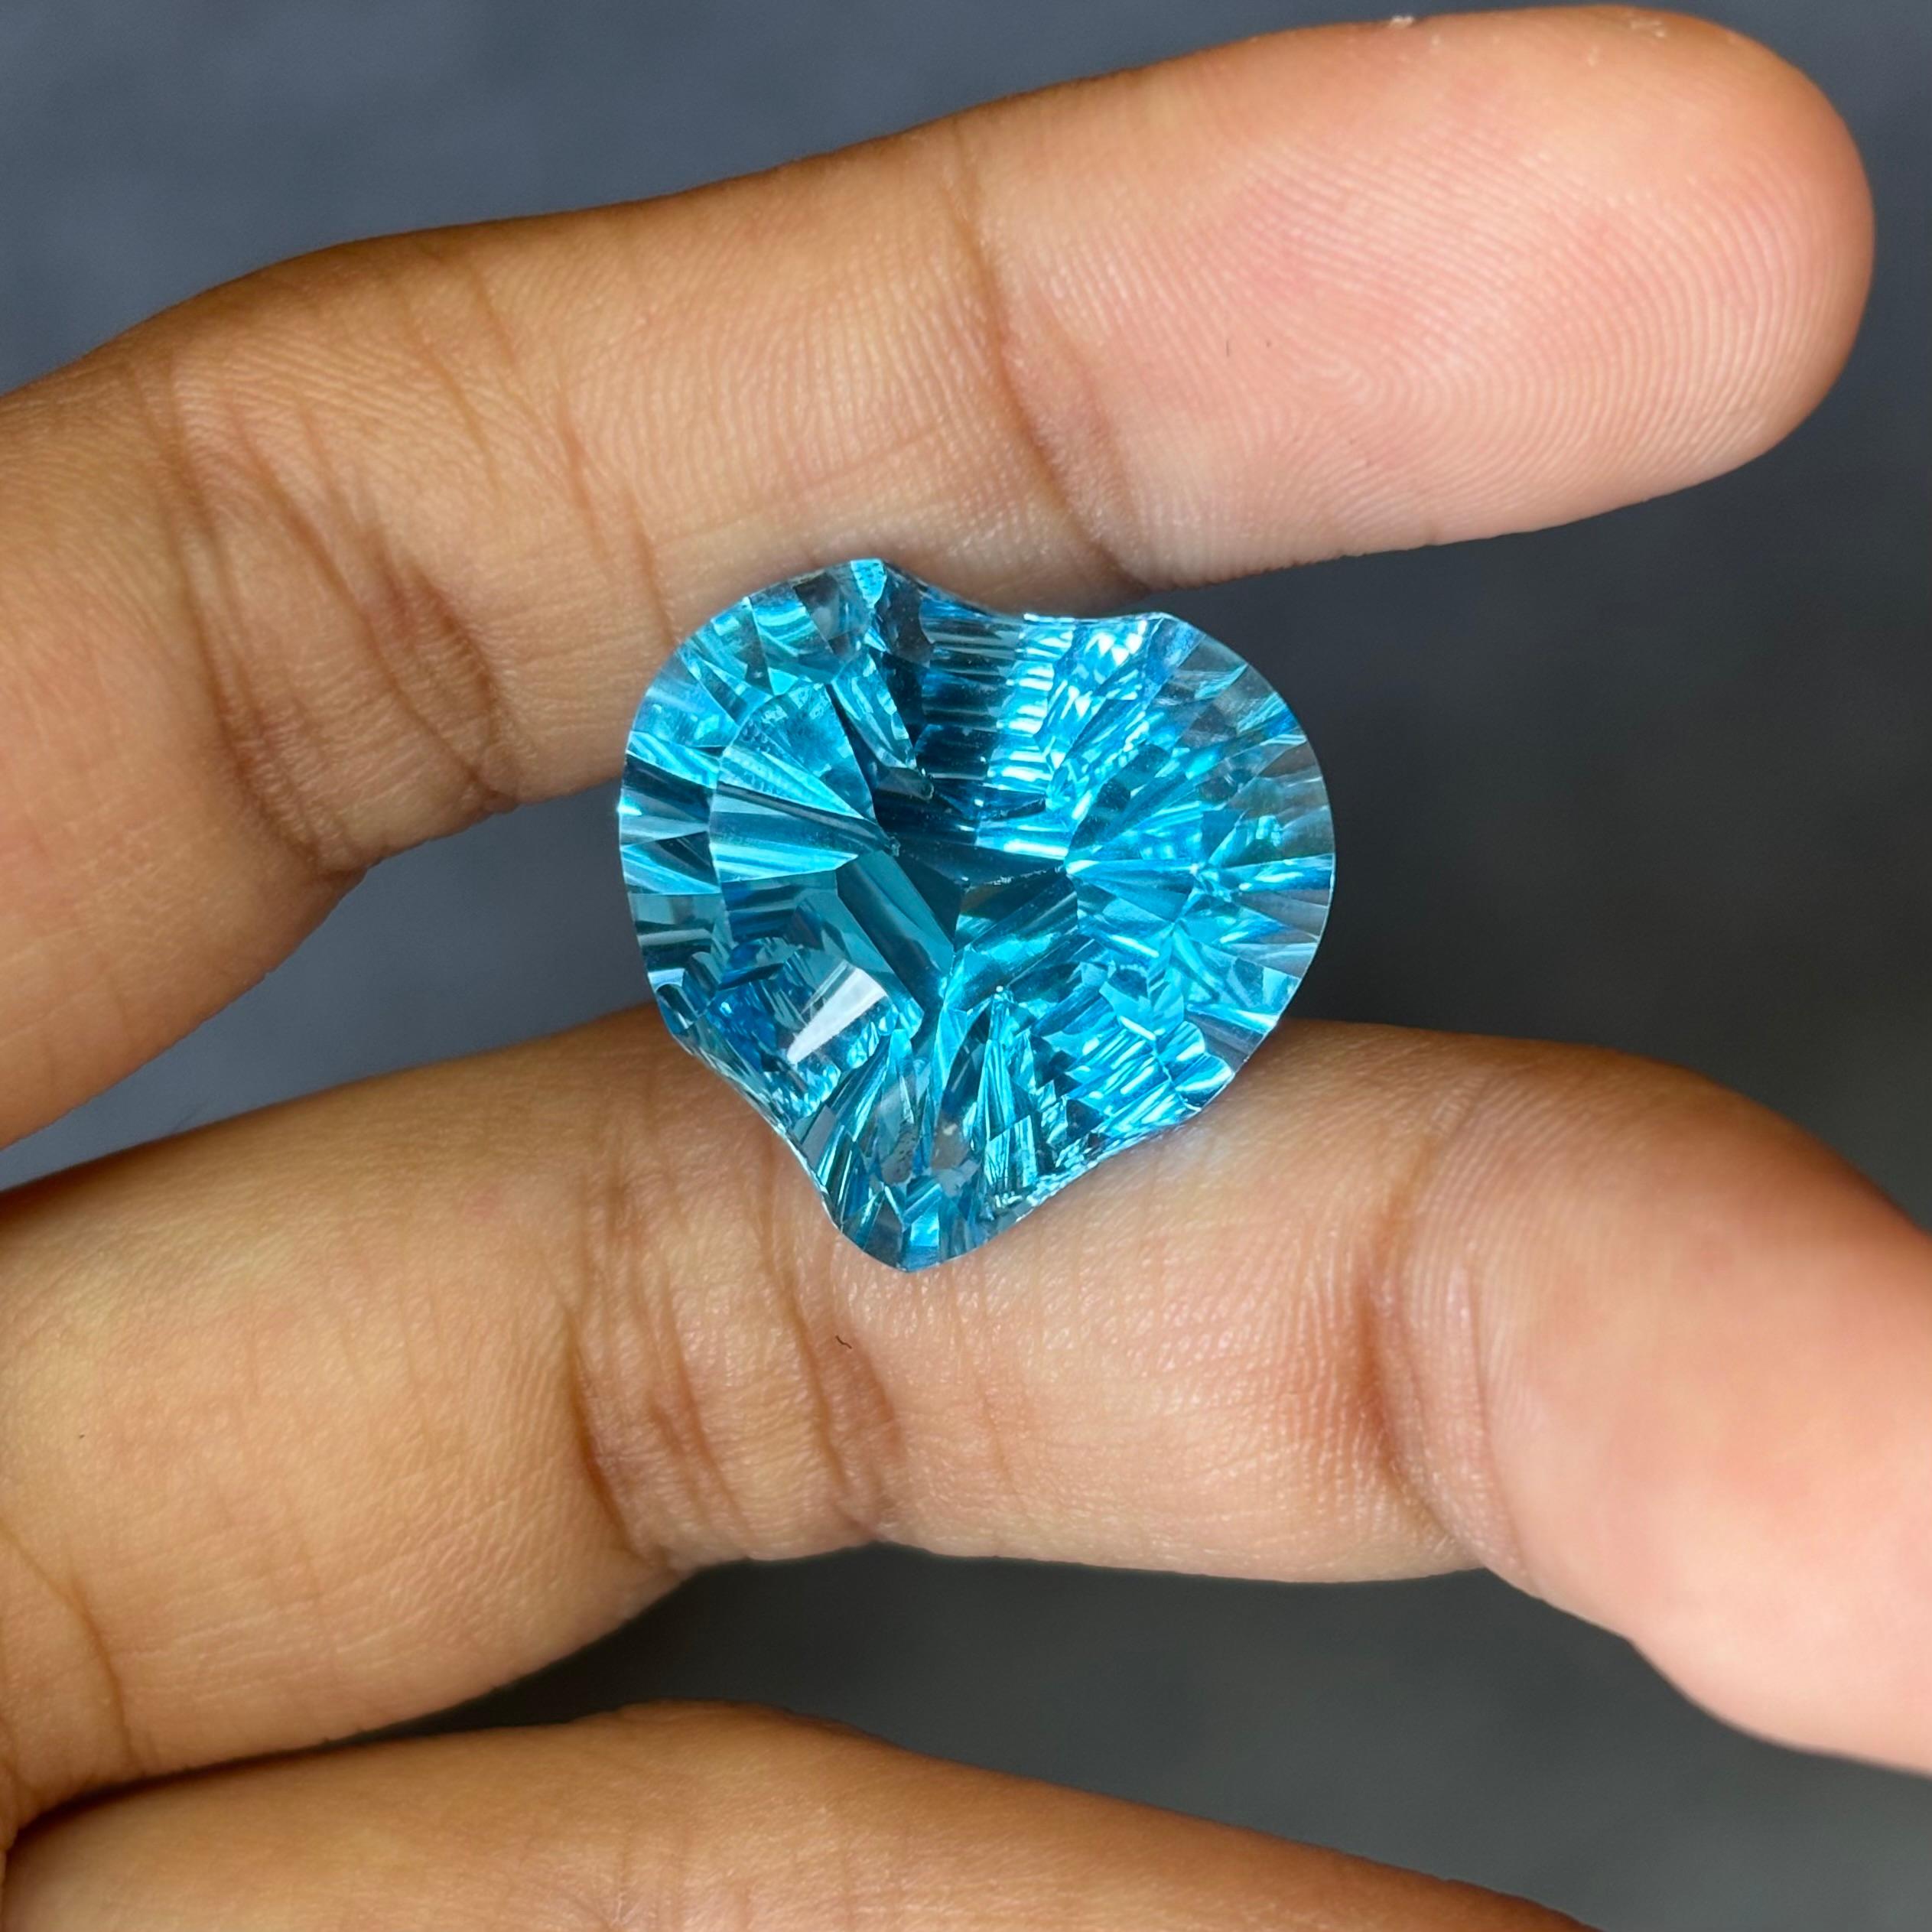 A stunning 24.12 Carat Topaz gemstone. It is completely natural and it is a clean stone.  The topaz has a unique and breath-taking  blue color that is sure to allure you at first sight! The topaz is cut to perfection in a gorgeous and unique heart